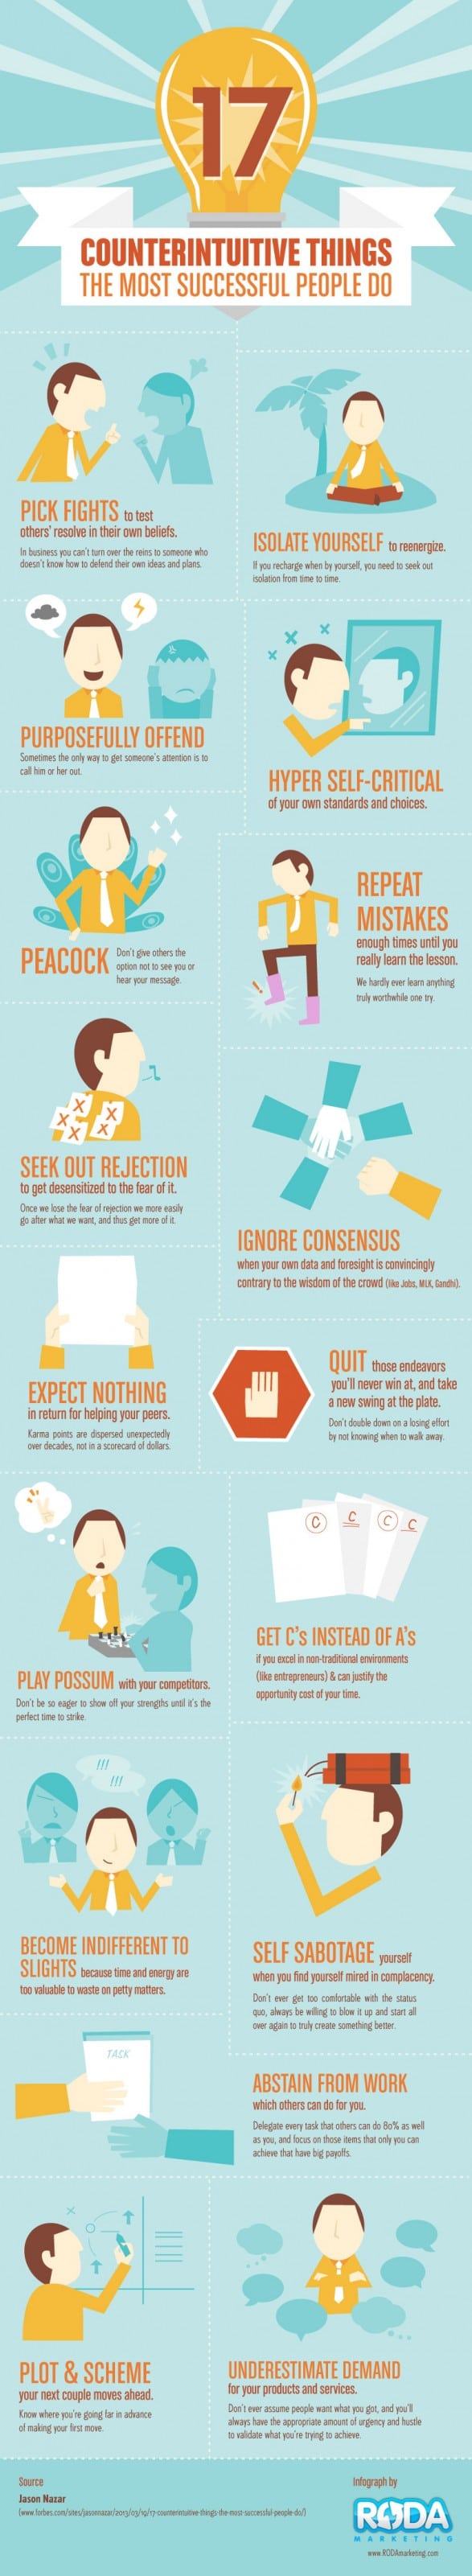 17 Counterintuitive Things The Most Successful People Do [Infographic]